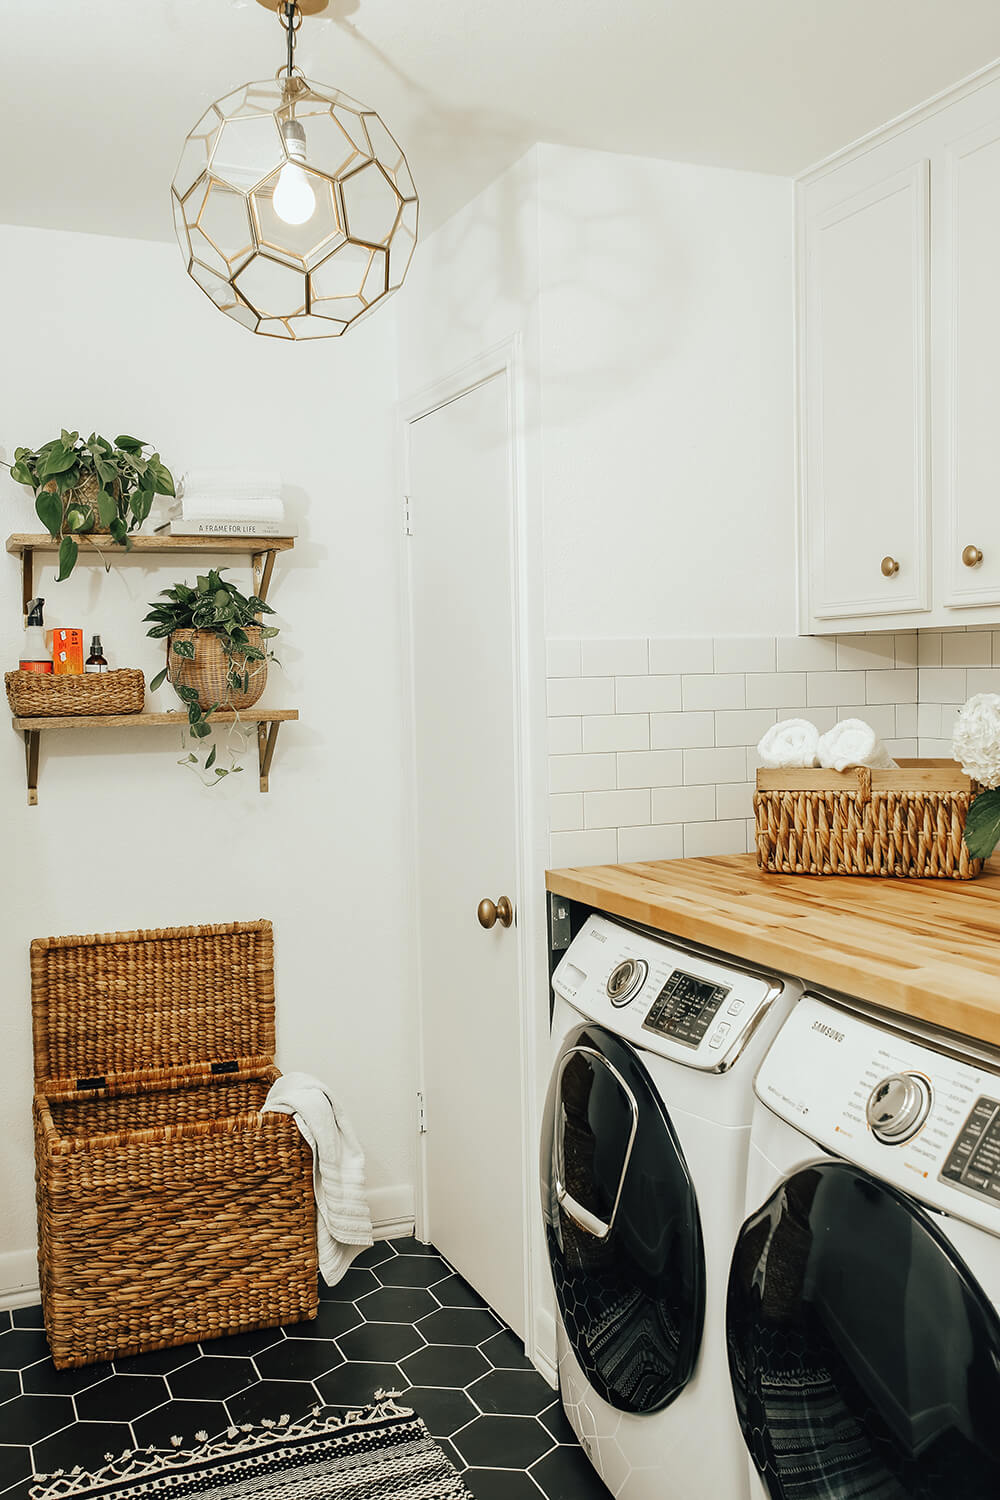 top loader laundry room ideas